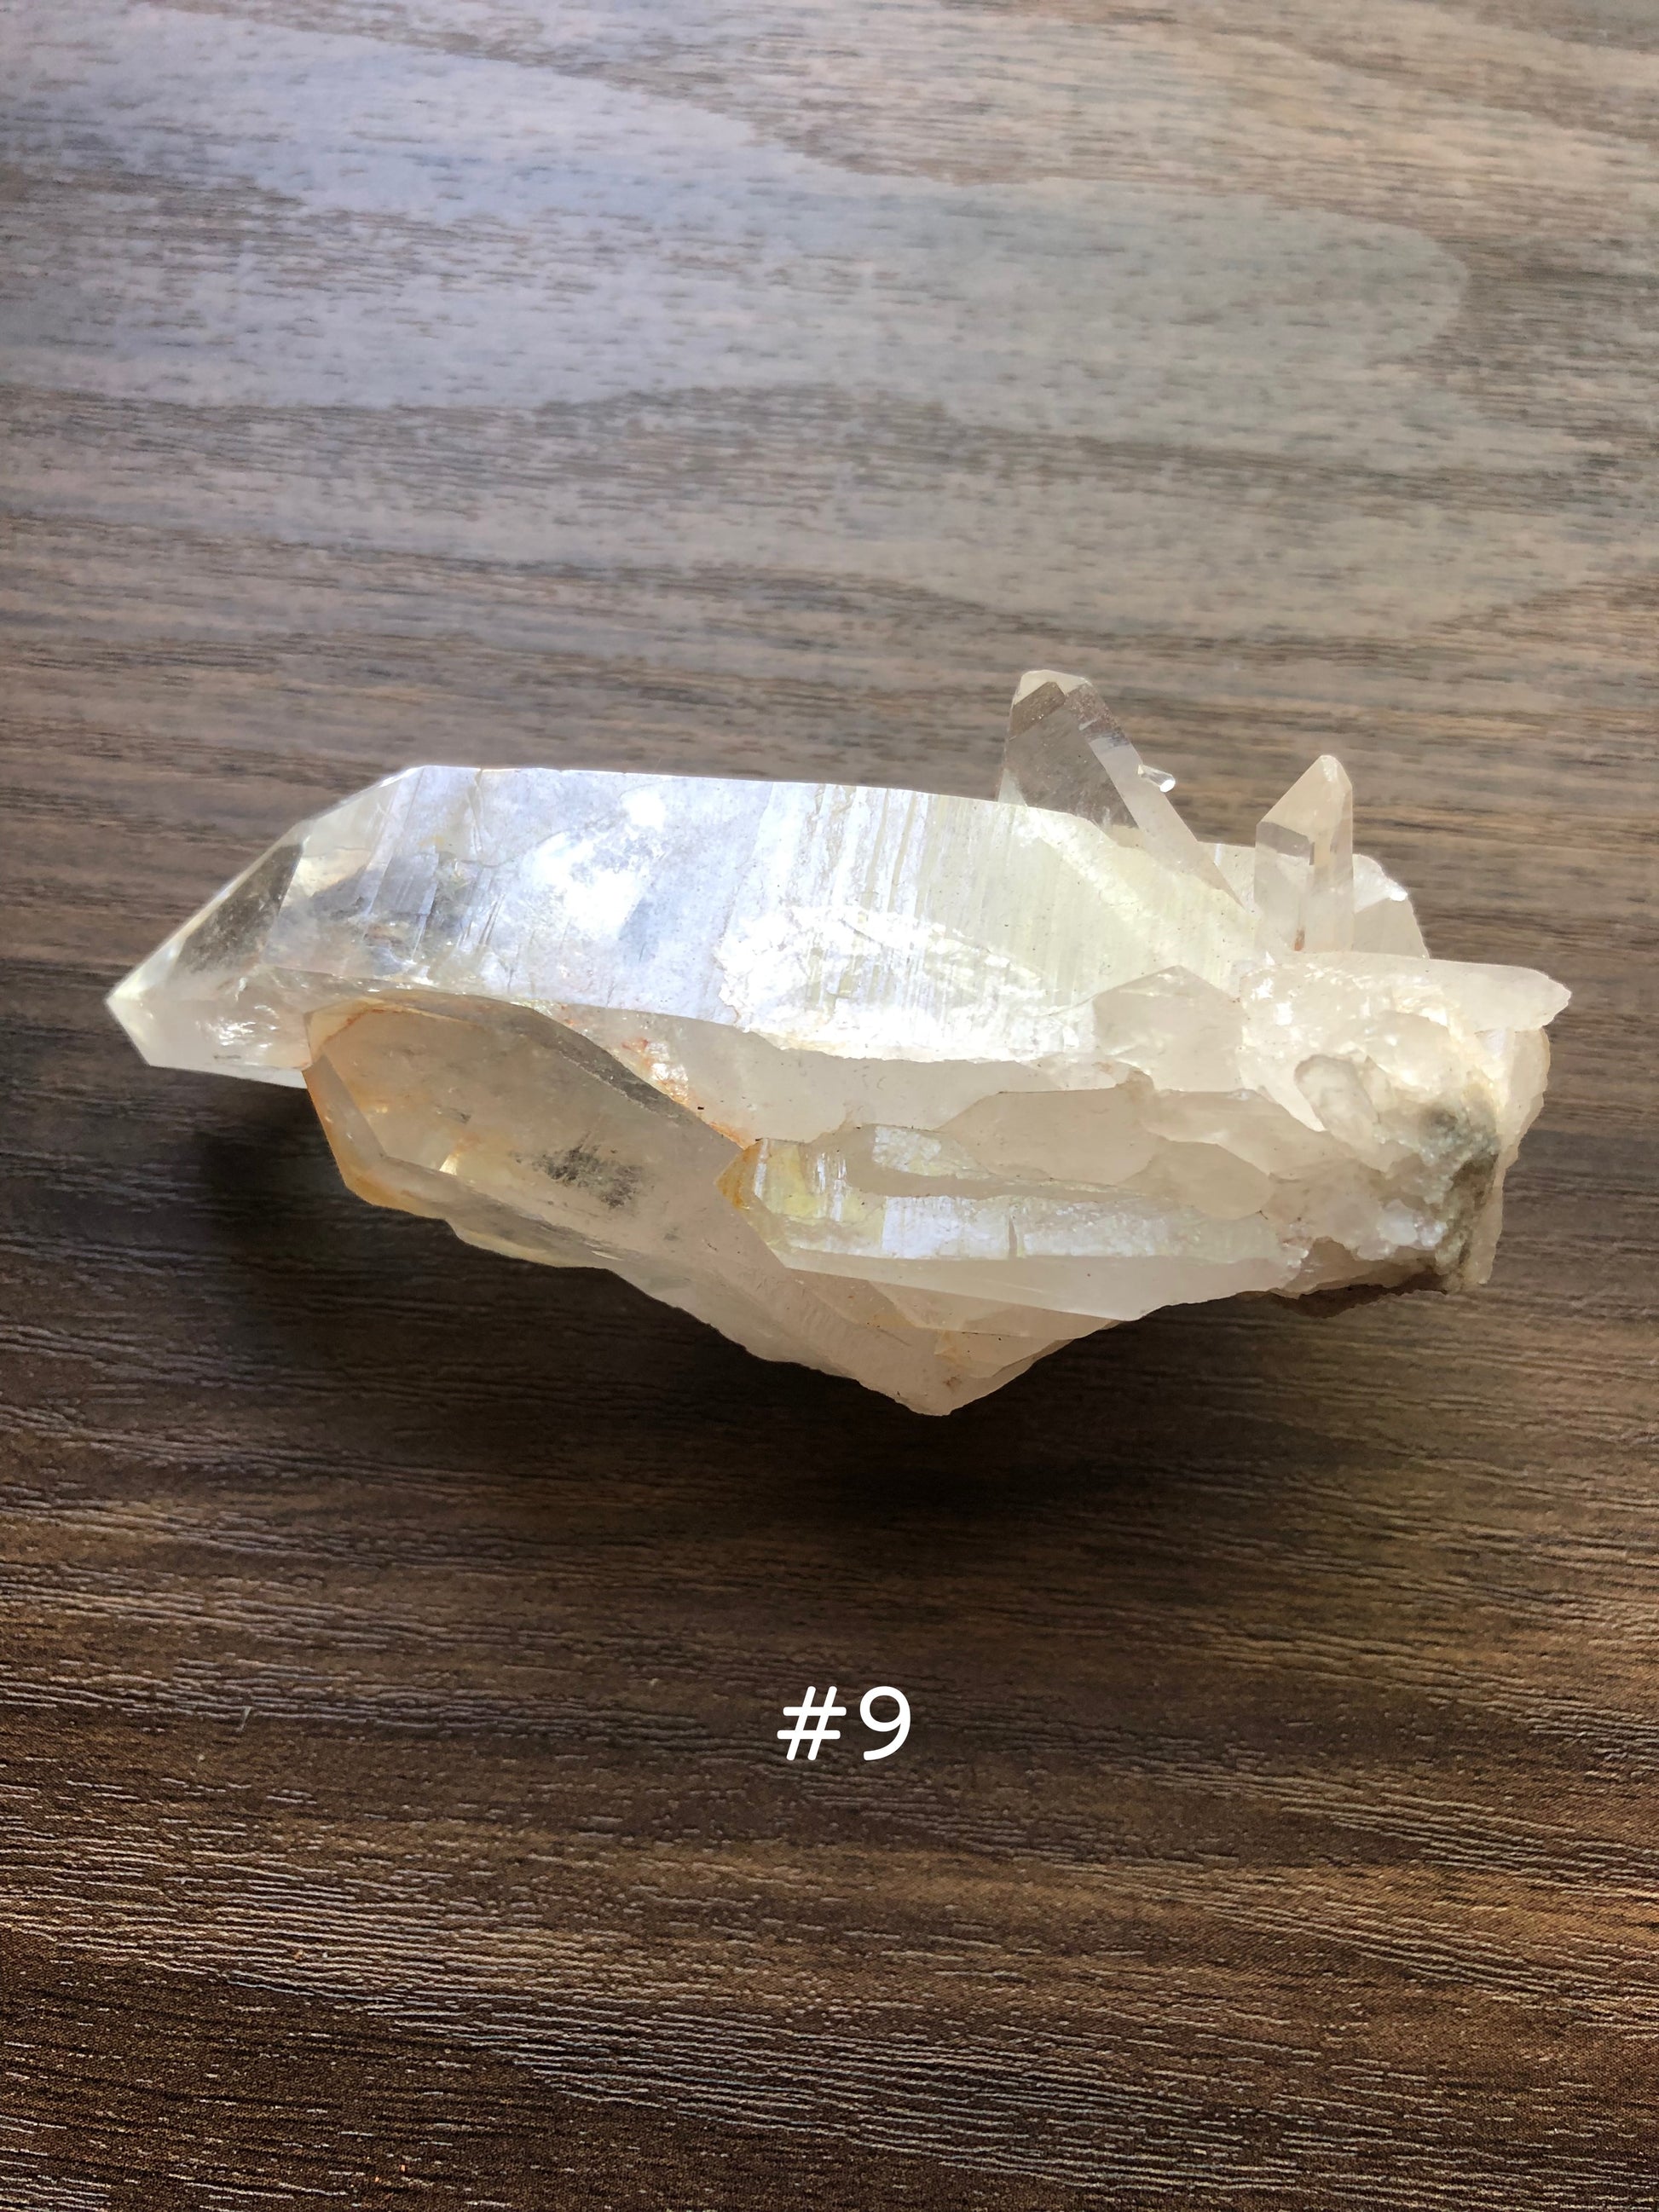 A large, rough cut quartz crystal rests on a wooden surface. It is jagged in shape with smaller clusters on it. The crystal is relatively clear with some slight discoloration. The number 9 is shown on the picture.